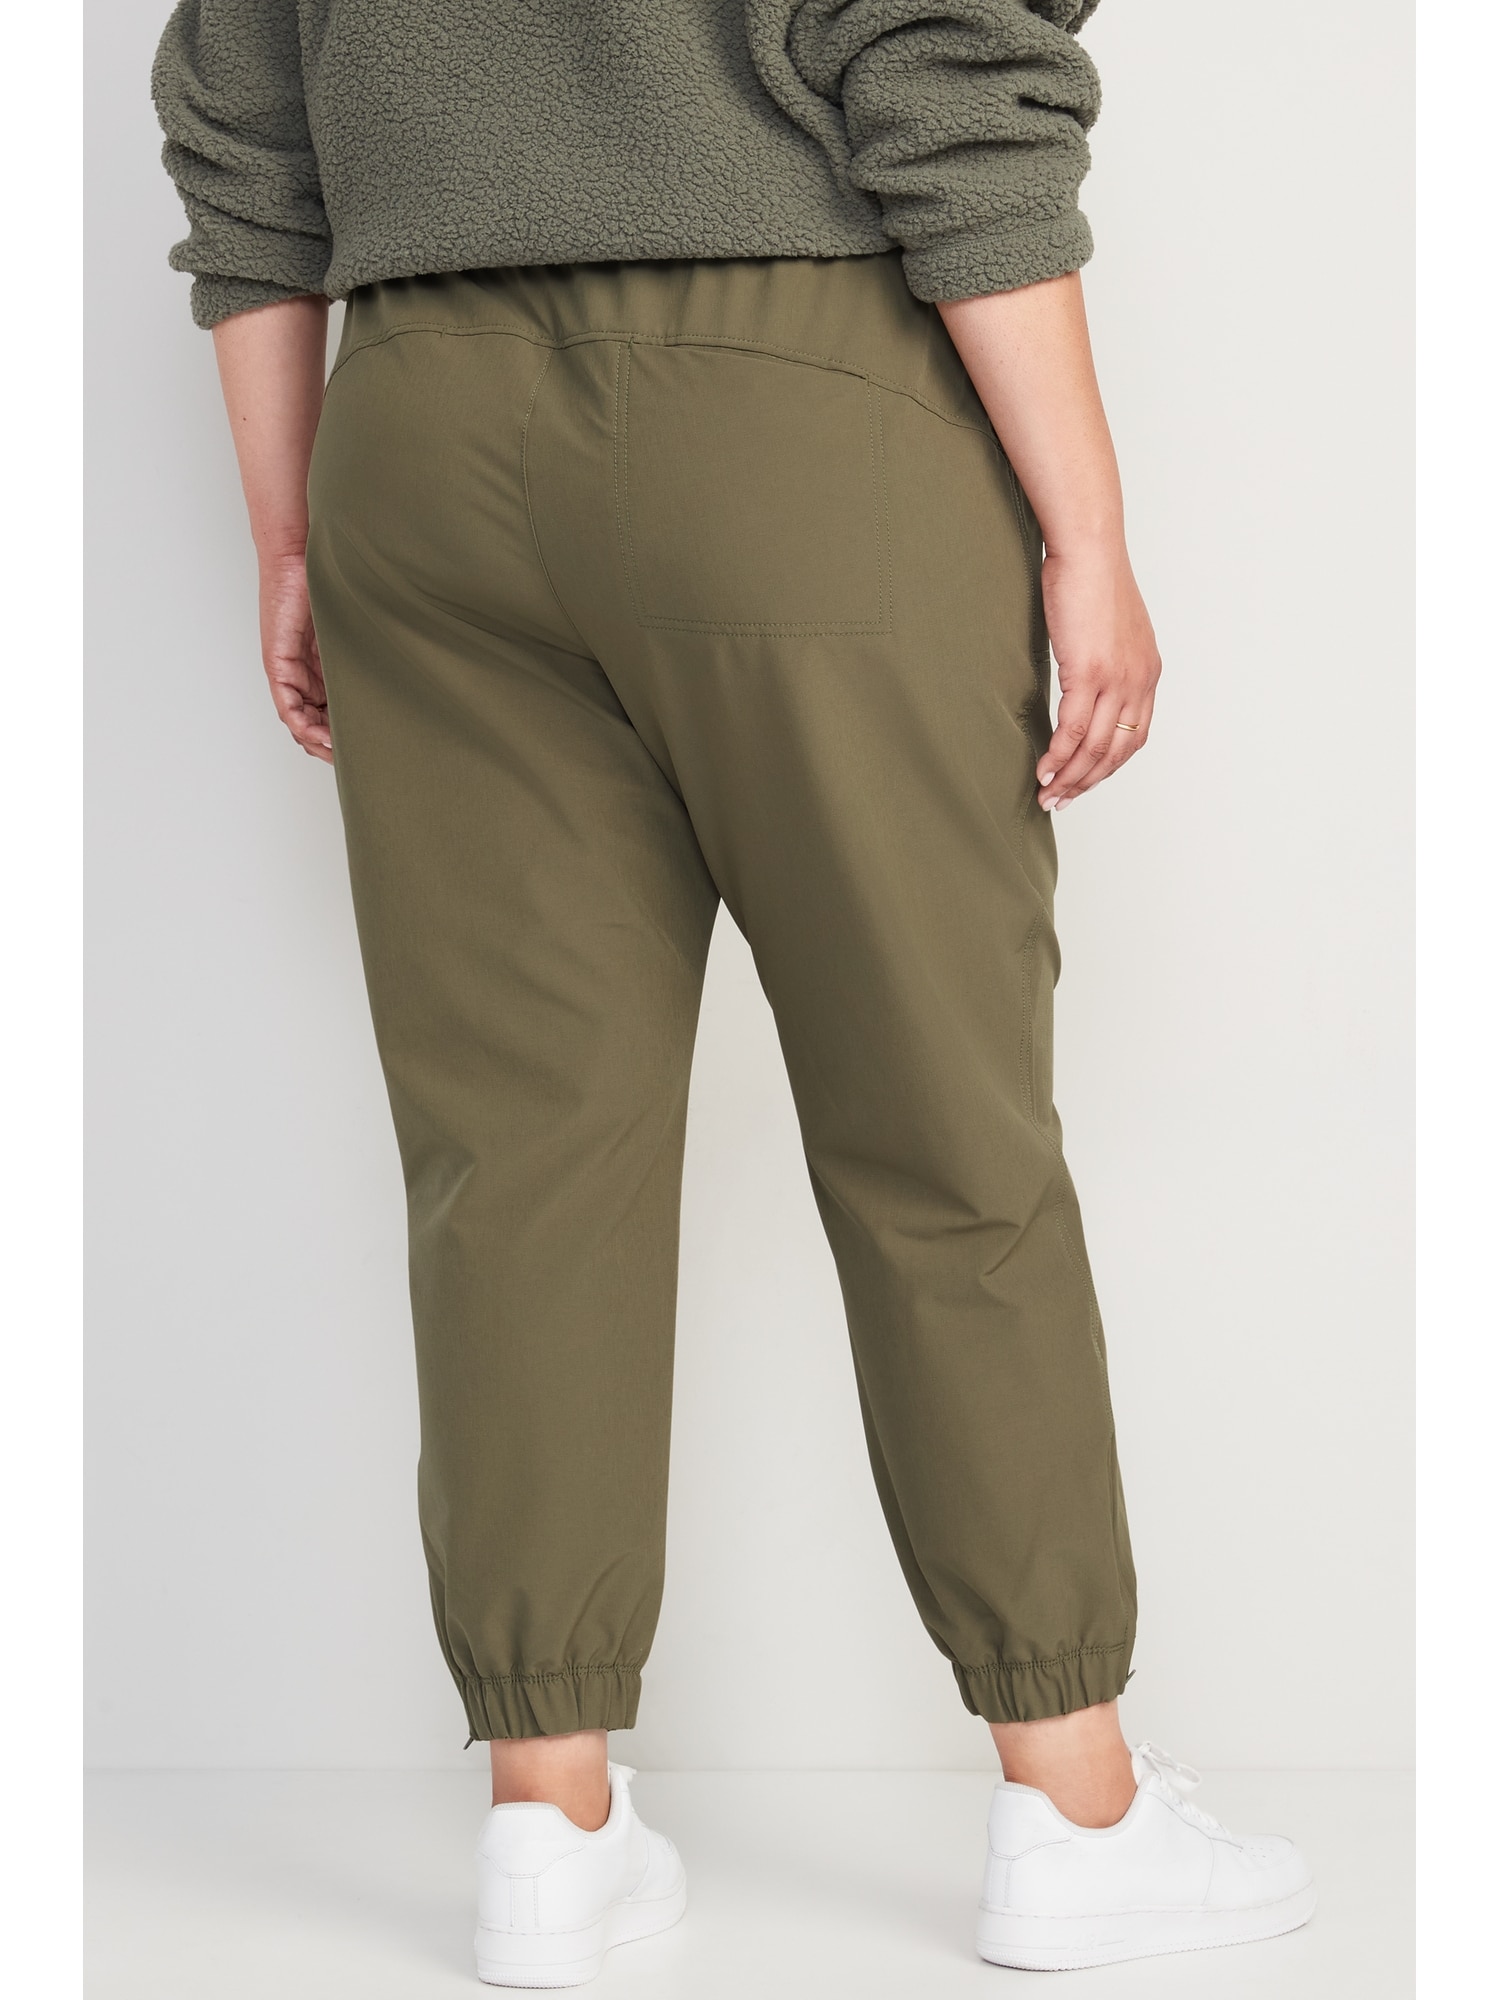 High-Waisted All-Seasons StretchTech Water-Repellent Jogger Pants for ...